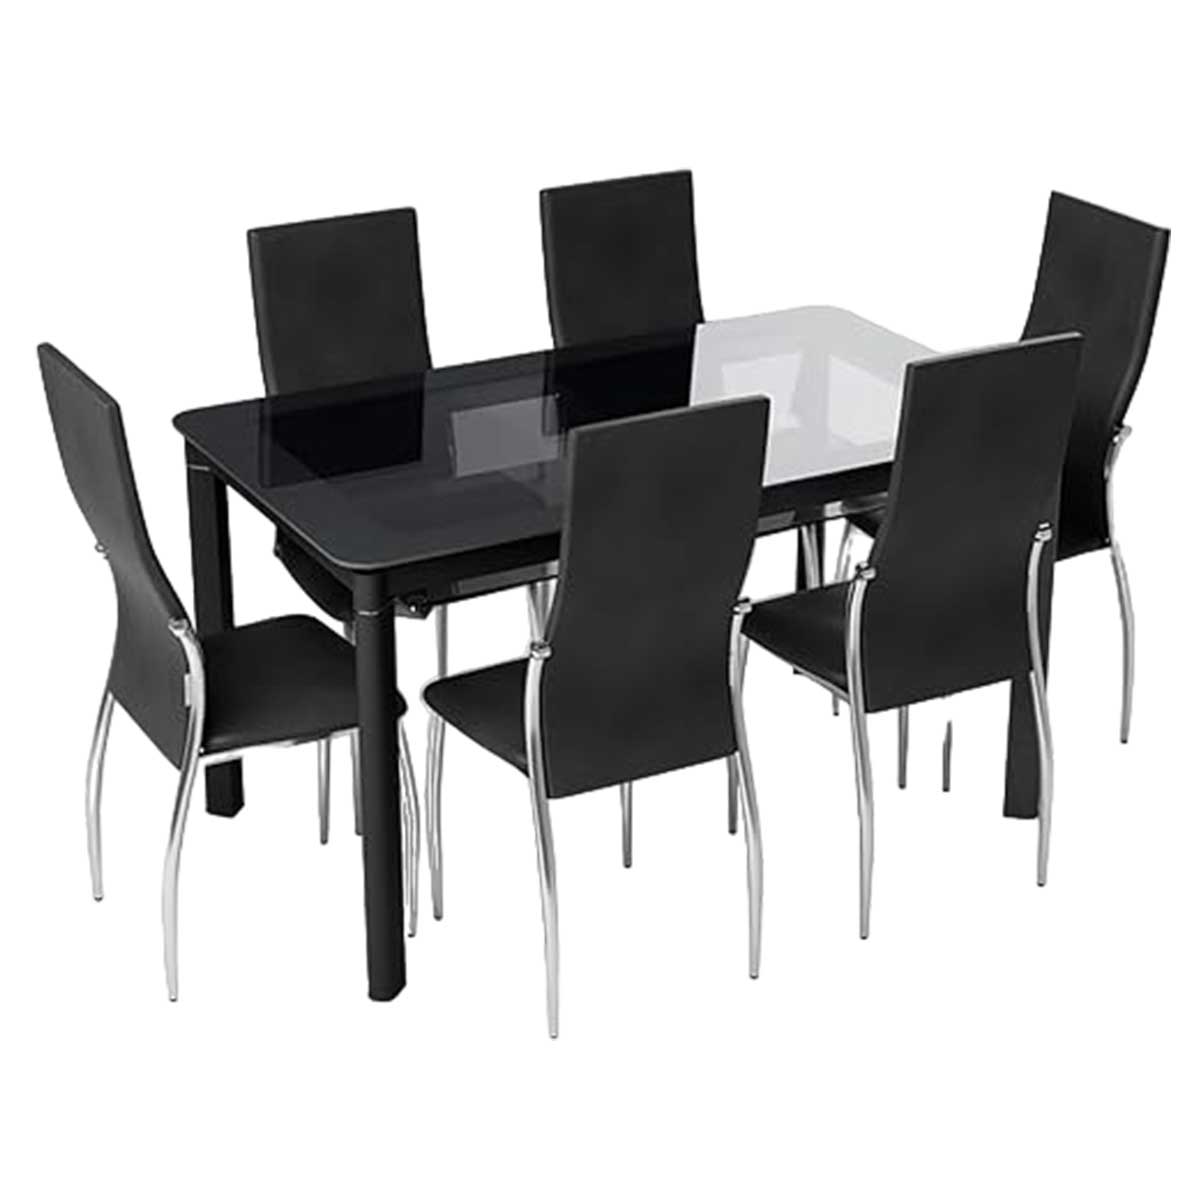 Cafeteria Furniture Set Manufacturers, Suppliers in Rohini Sector 9